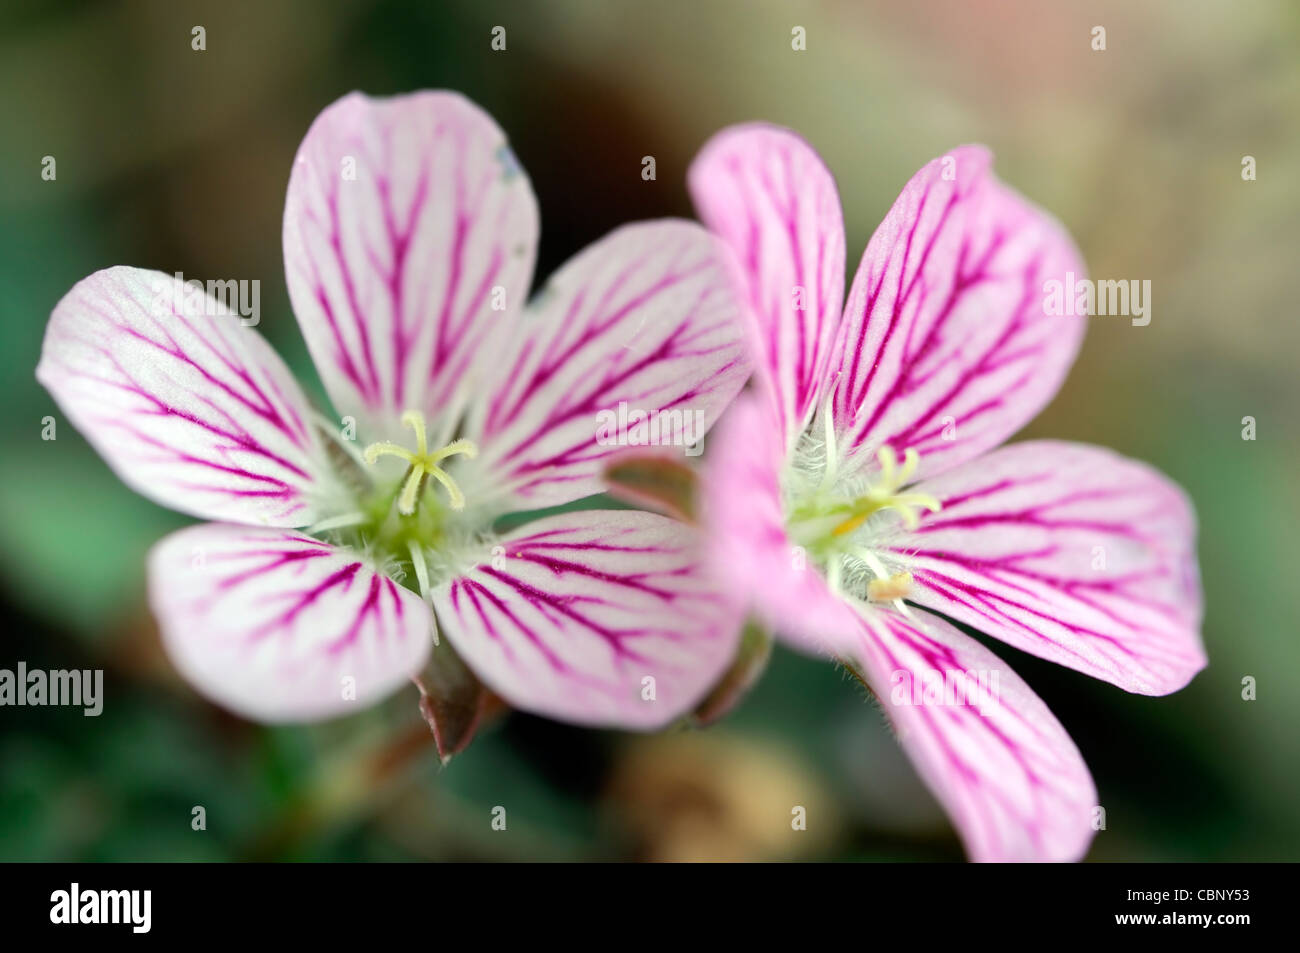 erodium reichardii rosea syn synonym chamaedryoides Storksbill pink flowers alpin perennial blooms blossoms Stock Photo